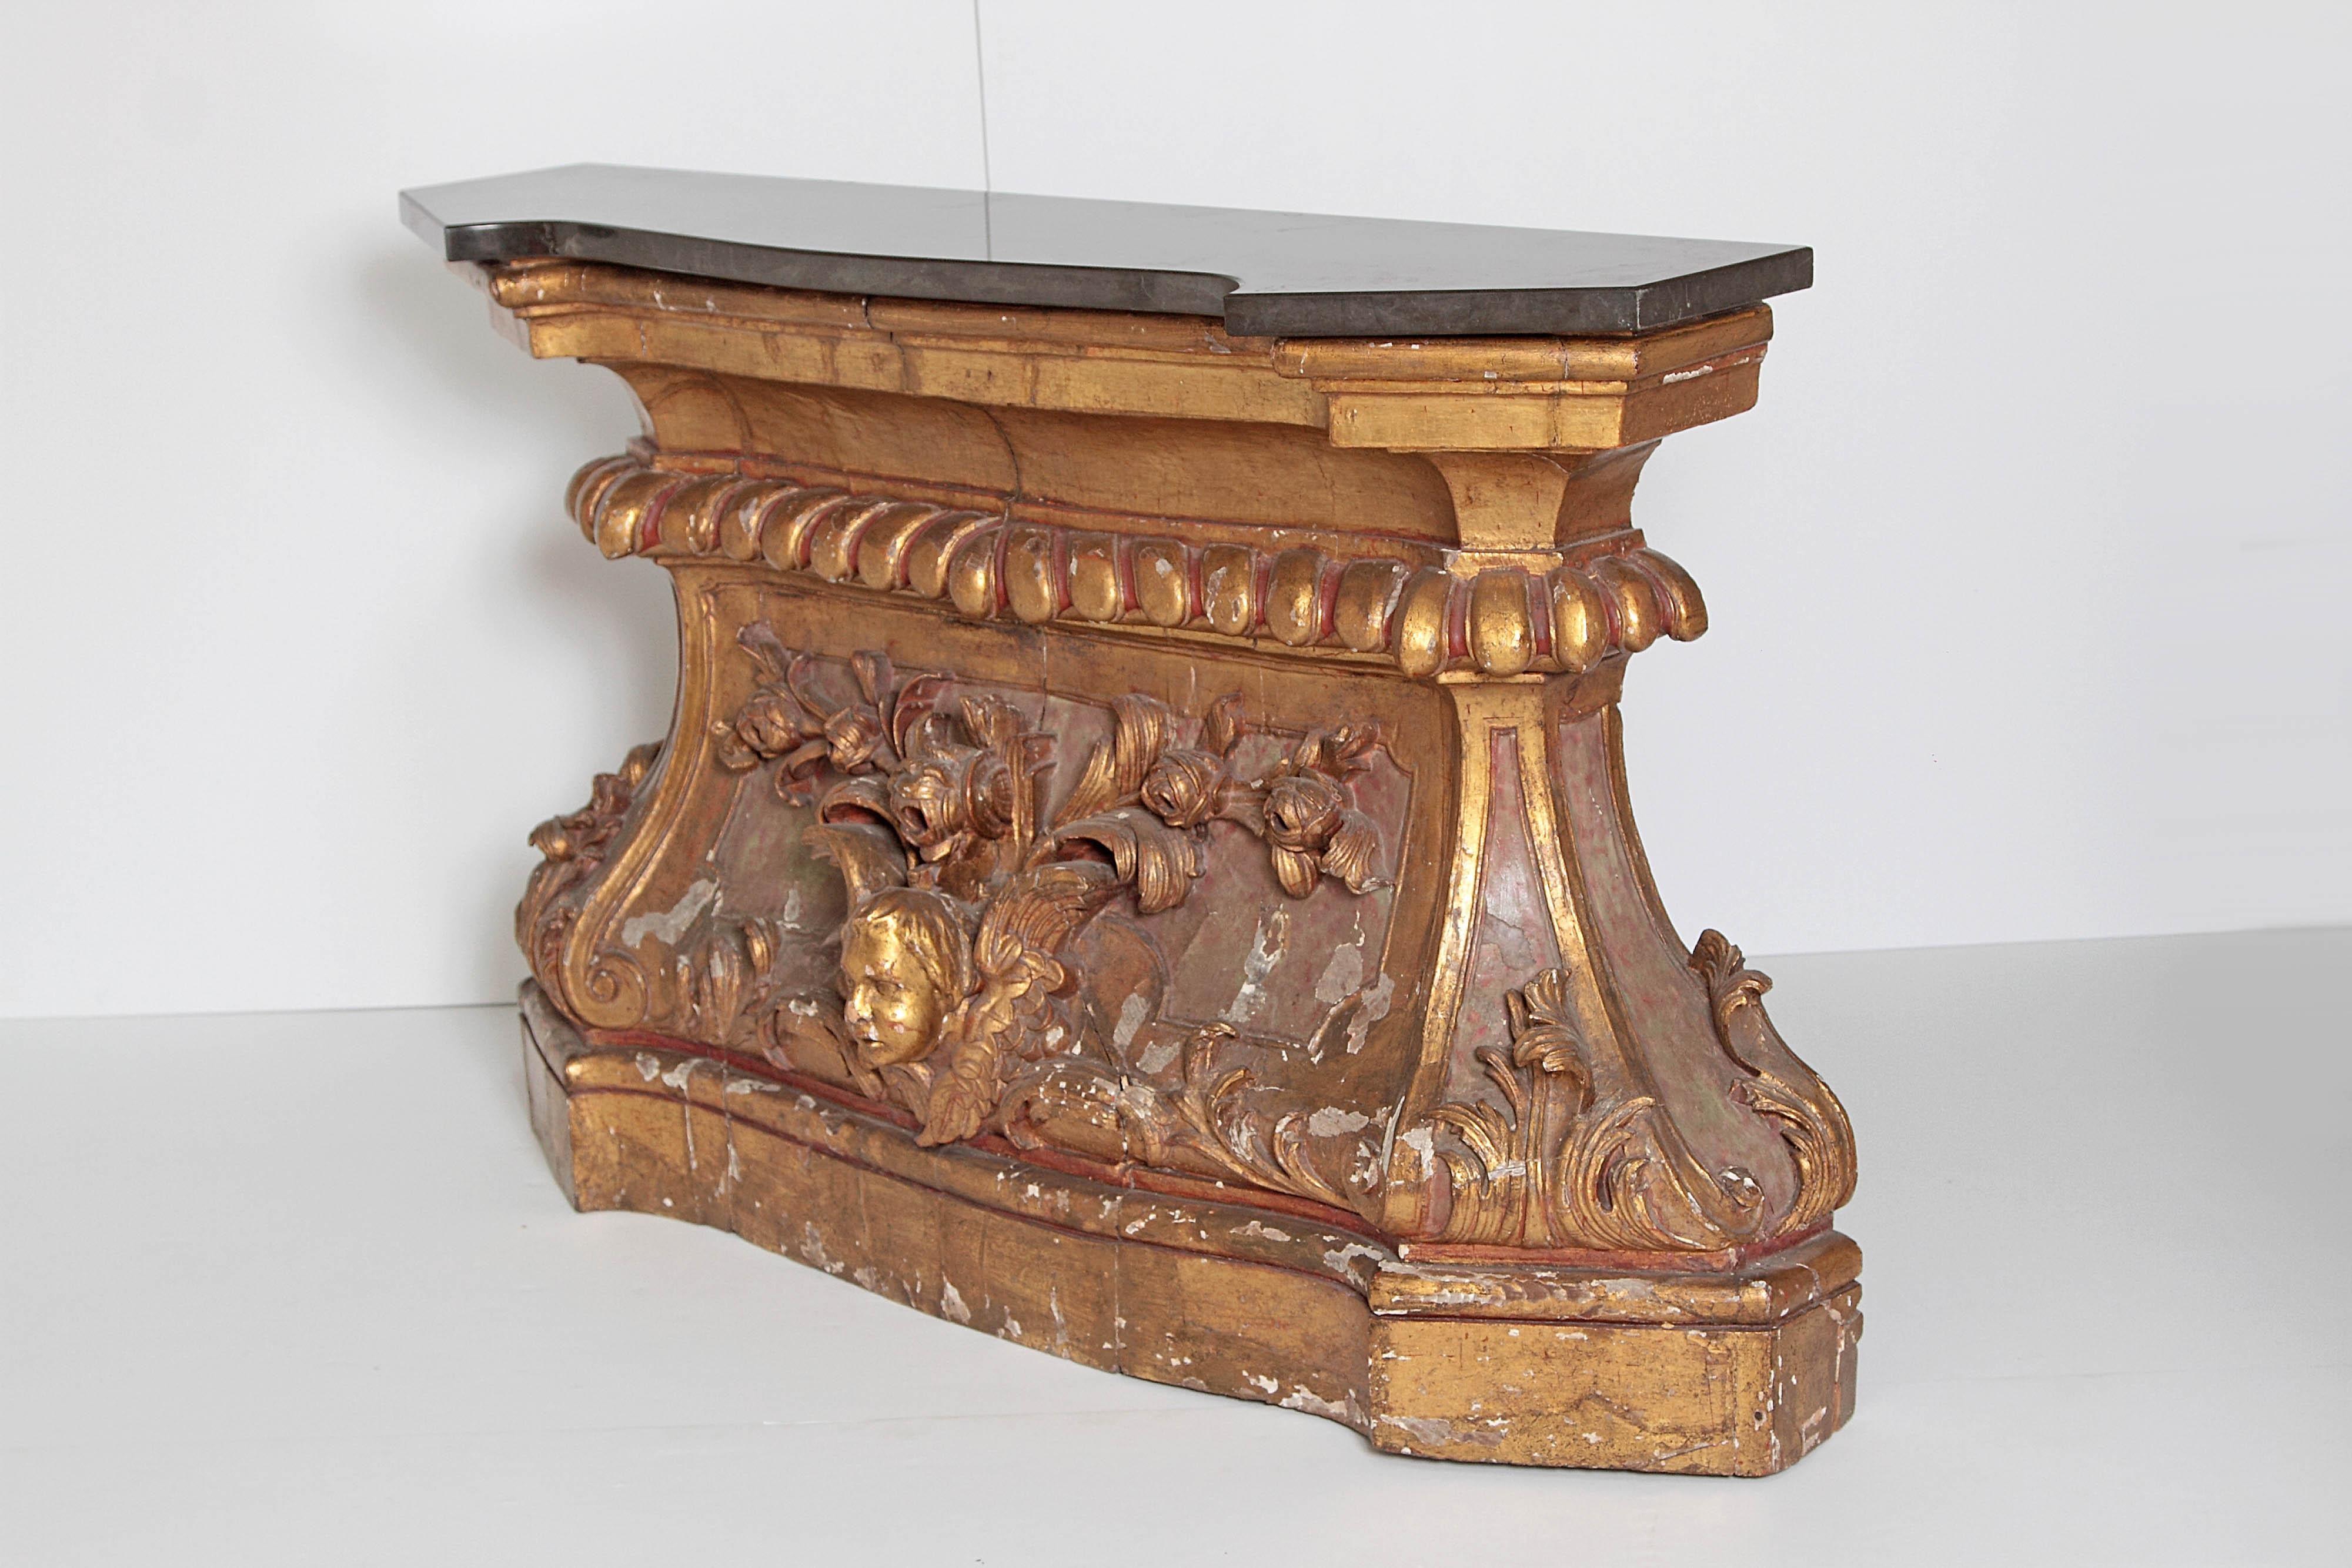 Hand-Carved Mid-18th Century Italian Architectural Fragment / Console Table